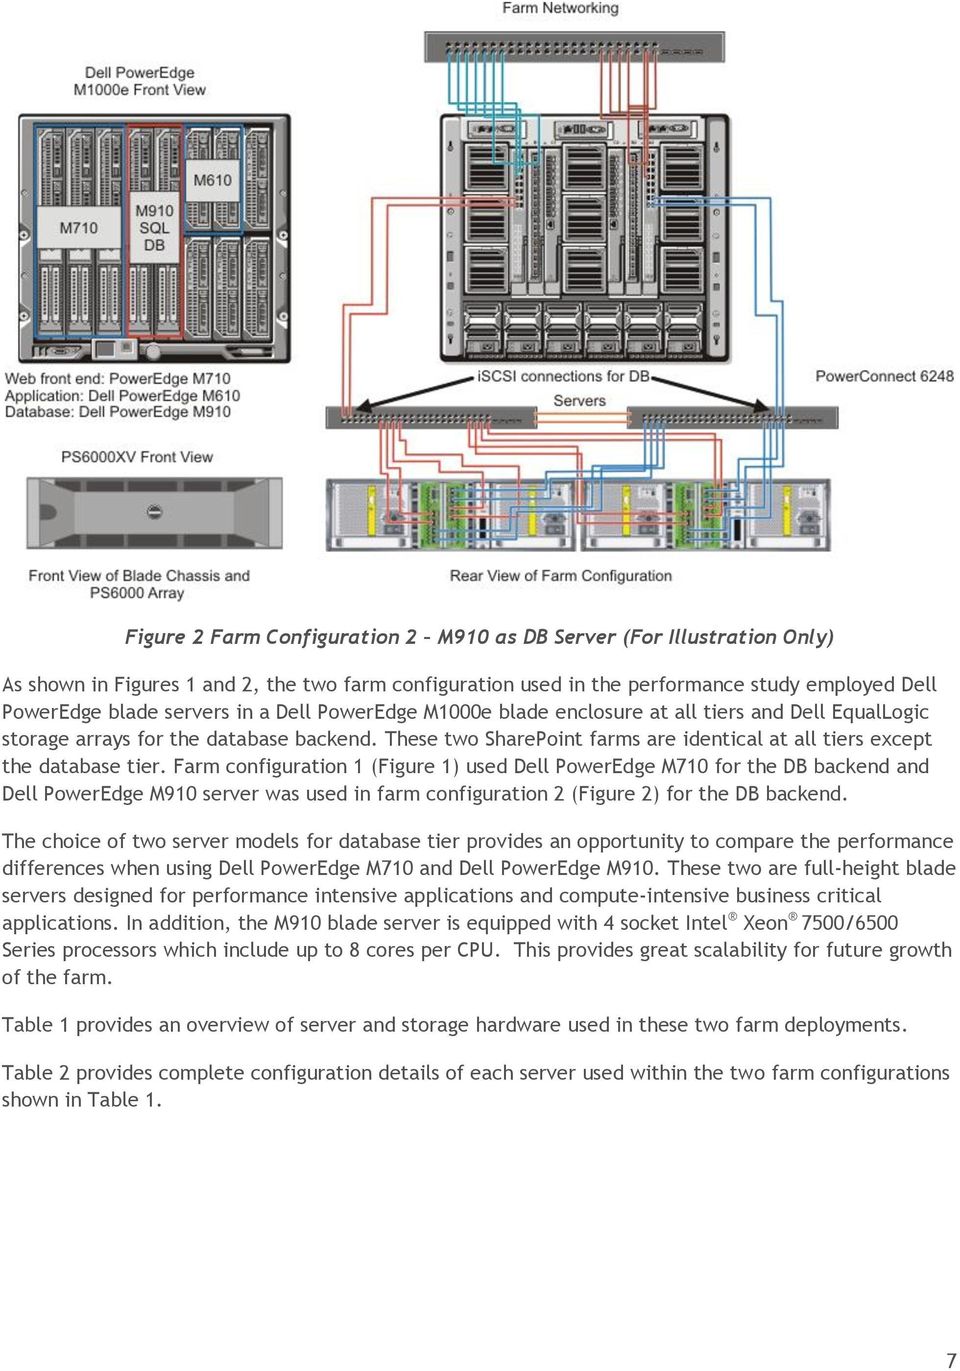 Farm configuration 1 (Figure 1) used Dell PowerEdge M710 for the DB backend and Dell PowerEdge M910 server was used in farm configuration 2 (Figure 2) for the DB backend.